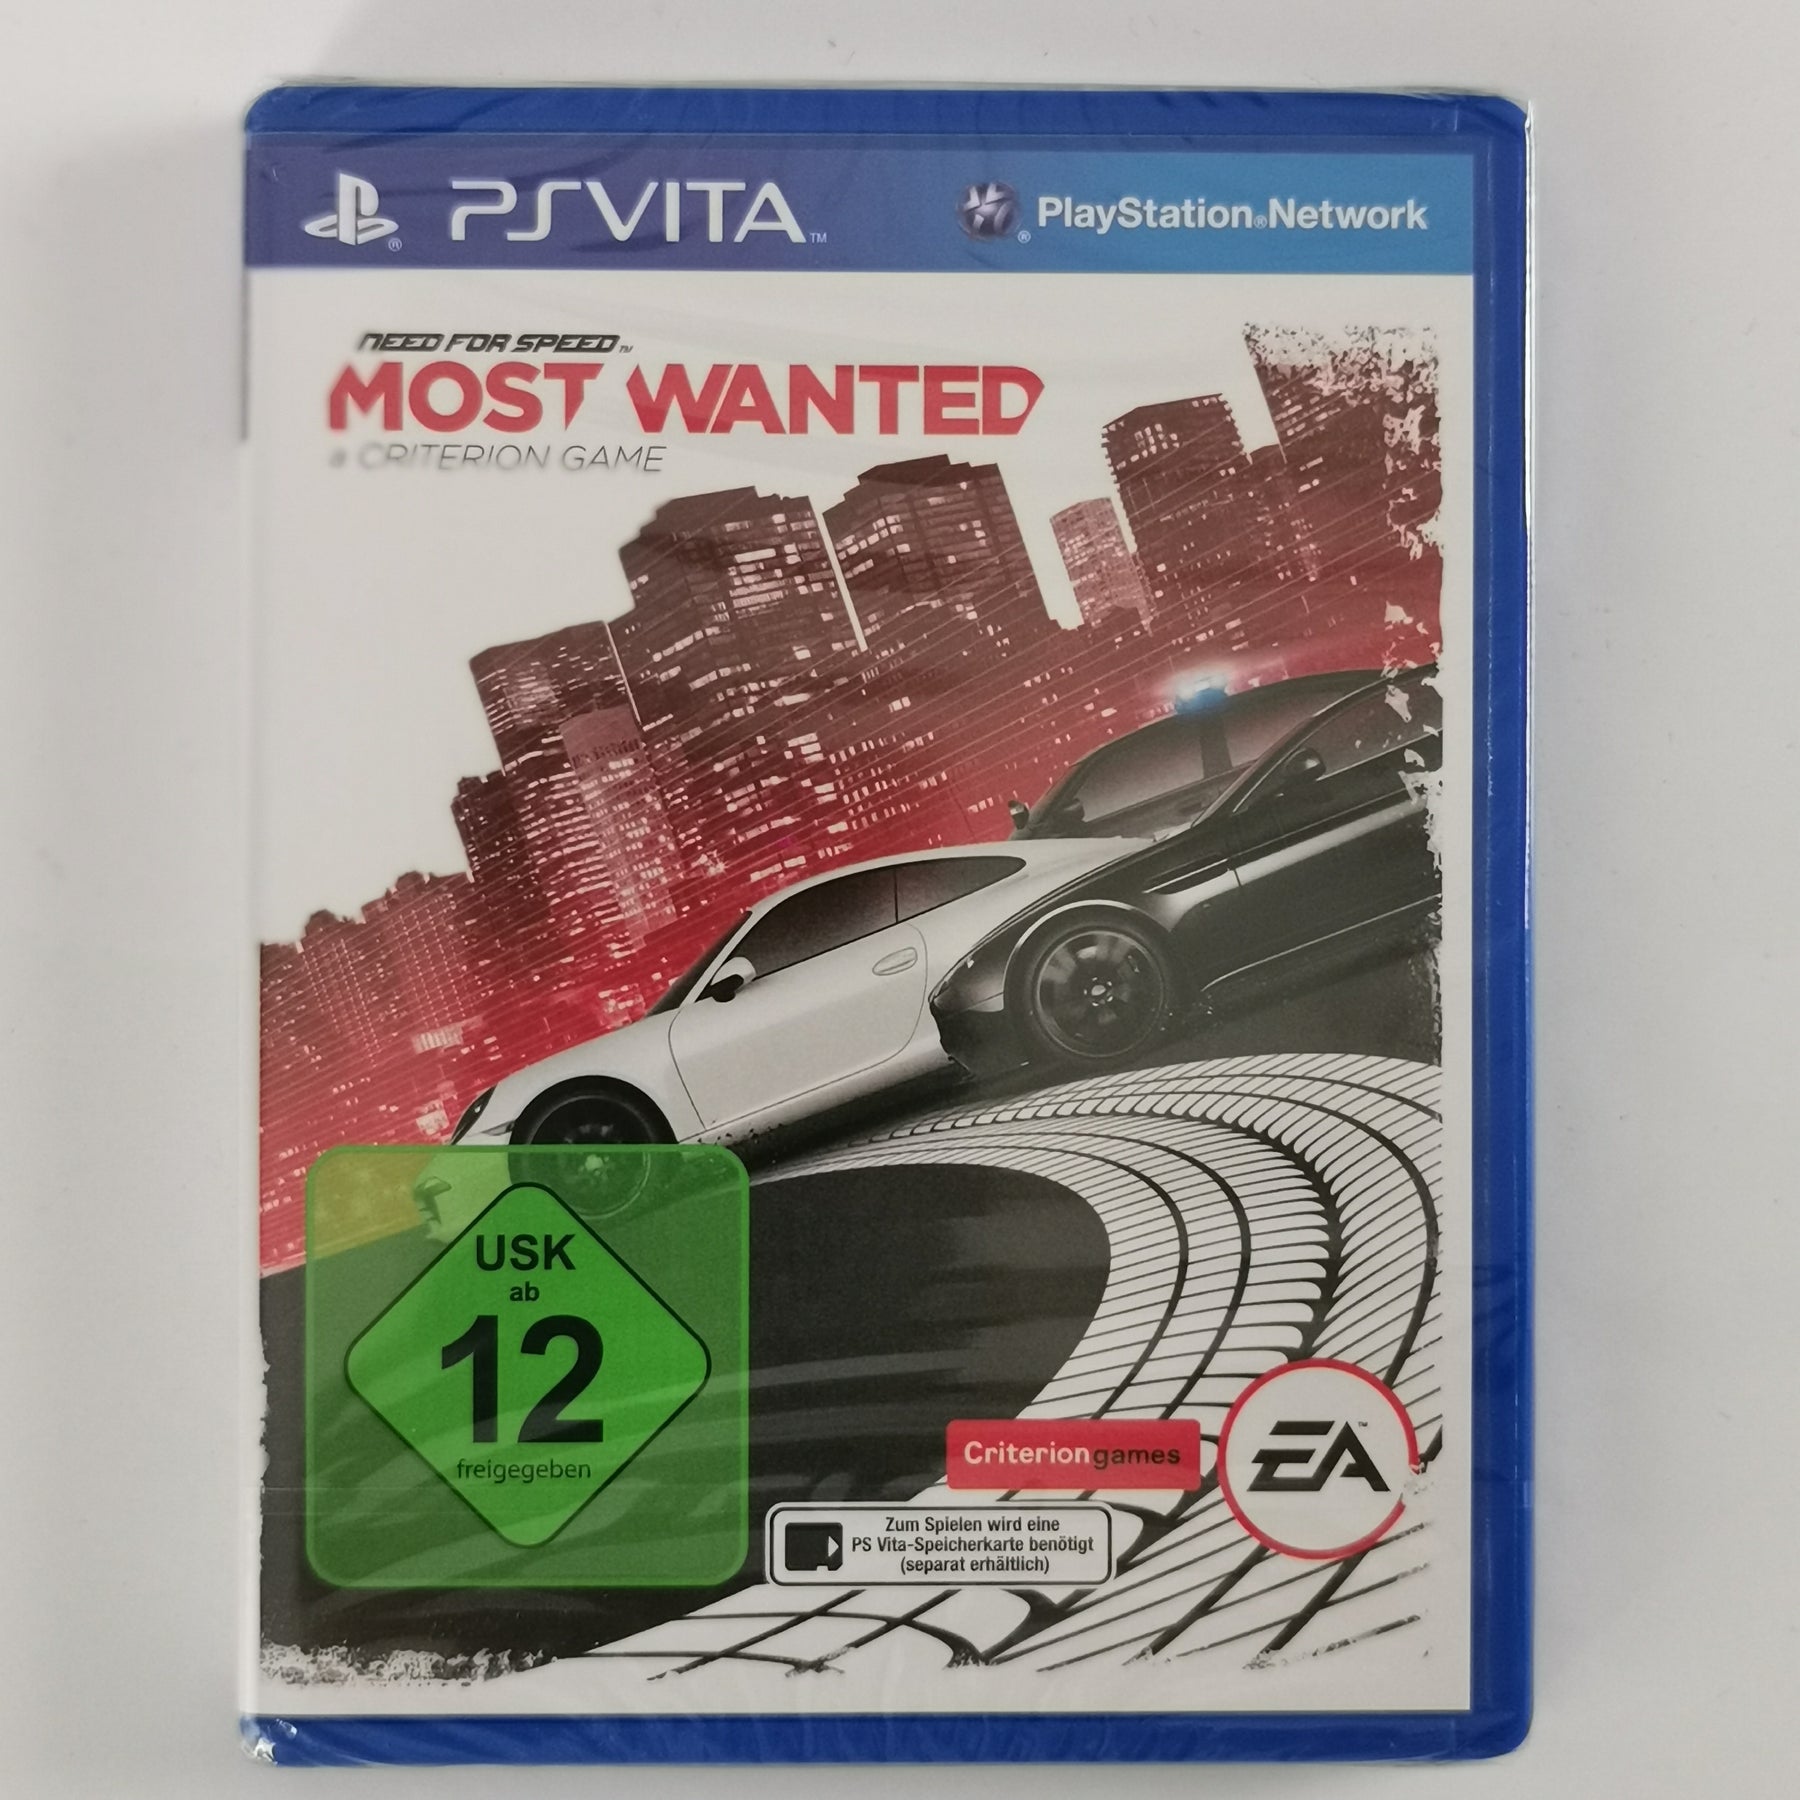 Need for Speed: Most Wanted [PSV]